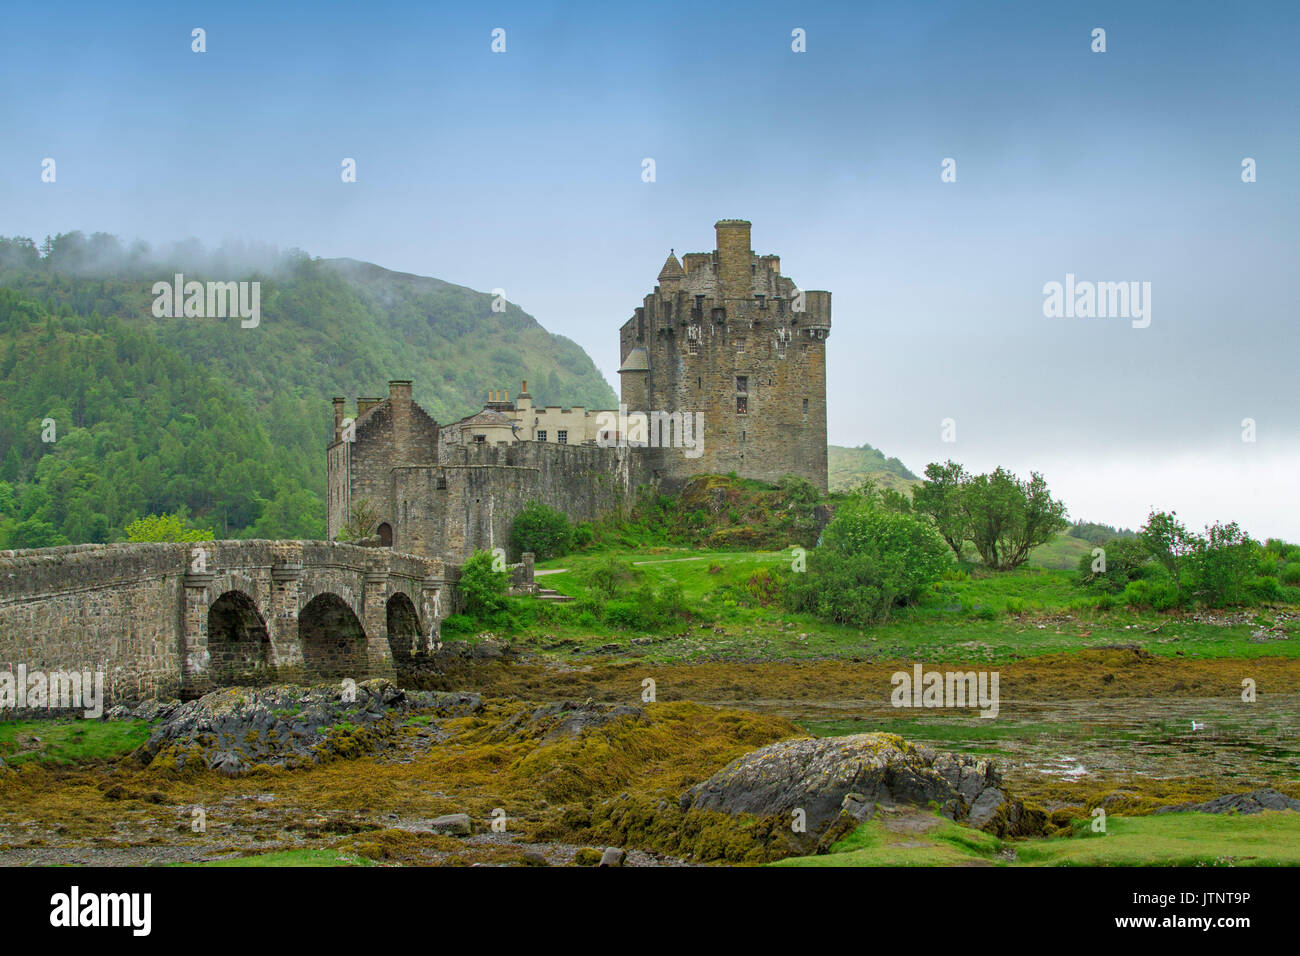 View of spectacular Eilean Donan castle and bridge across loch against blue sky and mist in Scotland Stock Photo